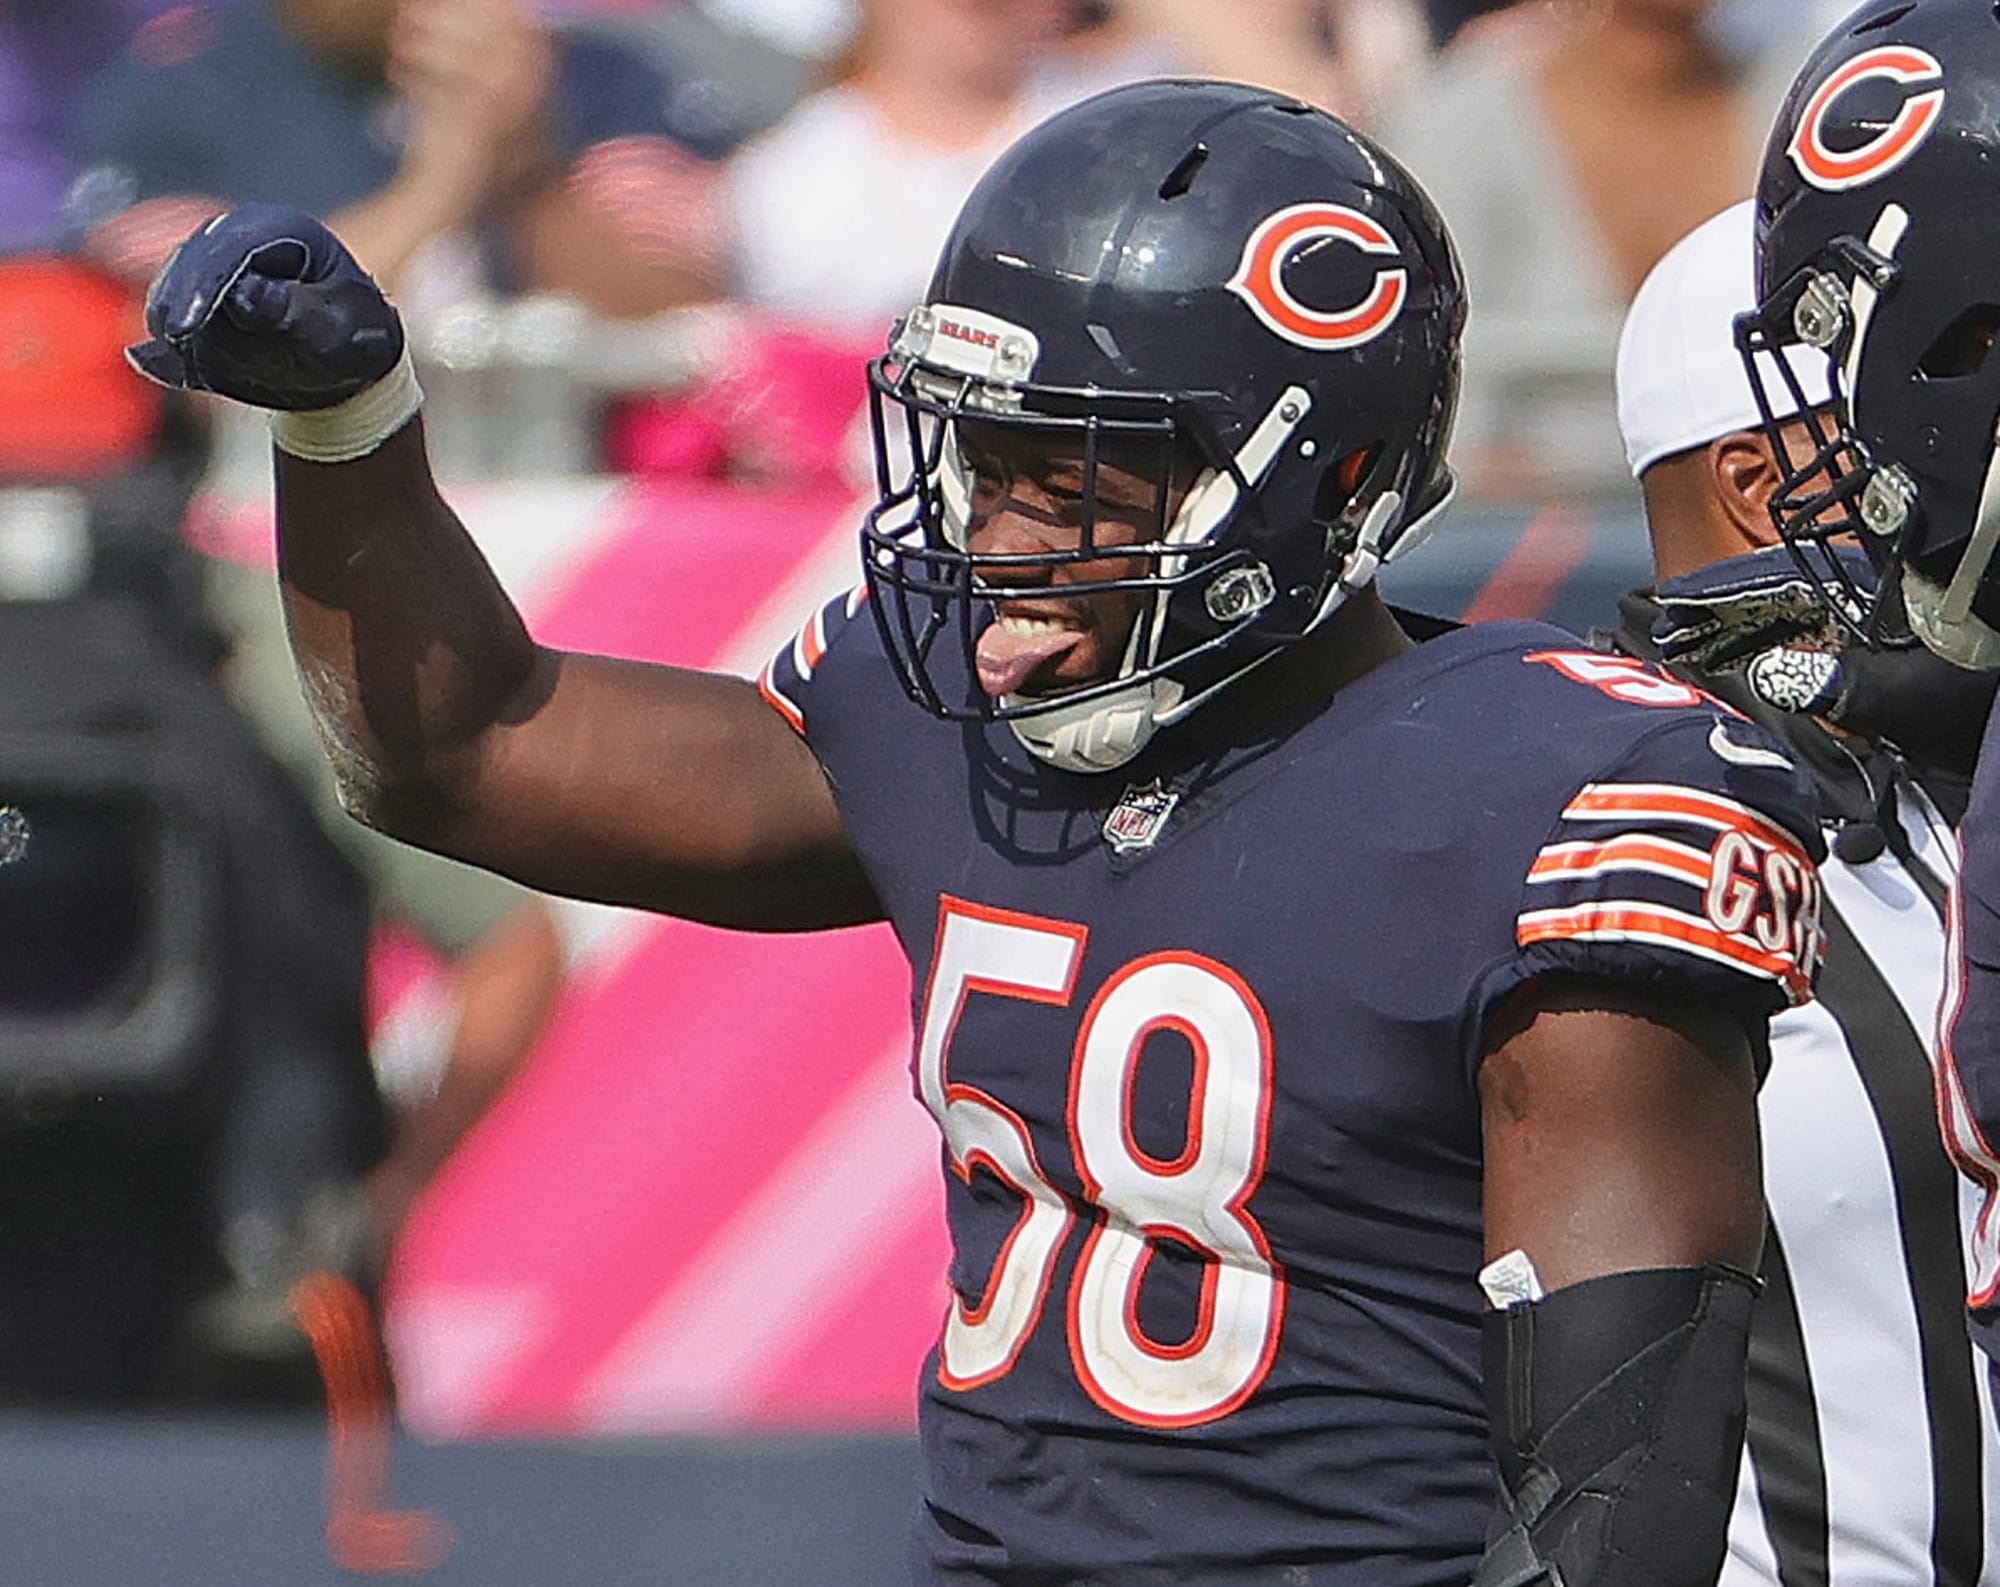 Sources: Chicago Bears LB Roquan Smith not acting like himself - ABC7  Chicago